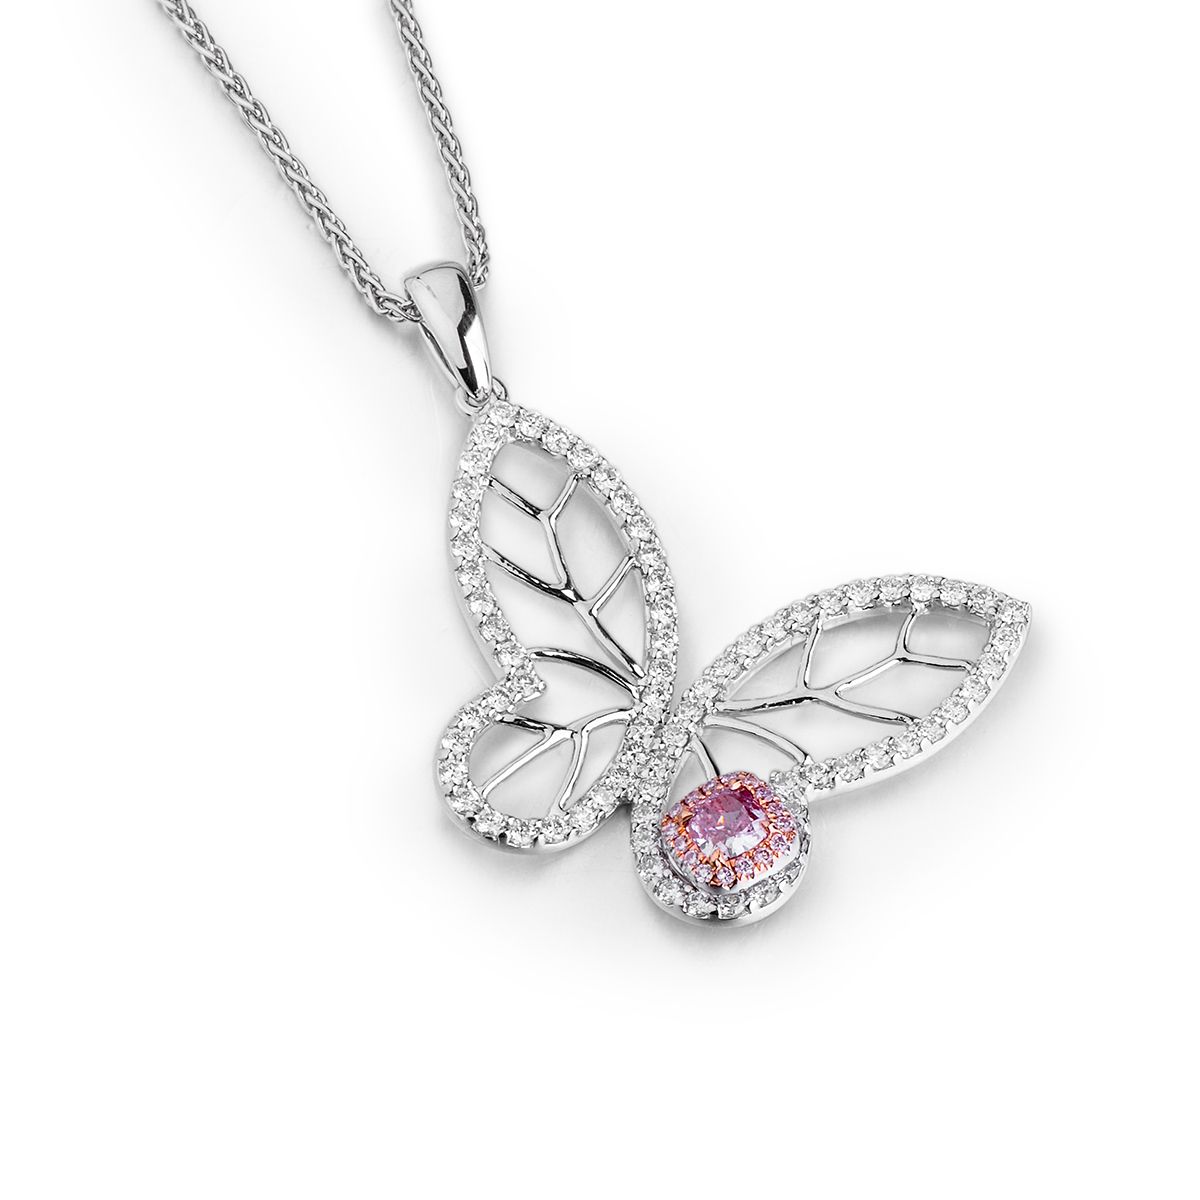 Fancy Brownish Pink Diamond Necklace, 0.17 Ct. (1.03 Ct. TW), Cushion shape, GIA Certified, 6187417477